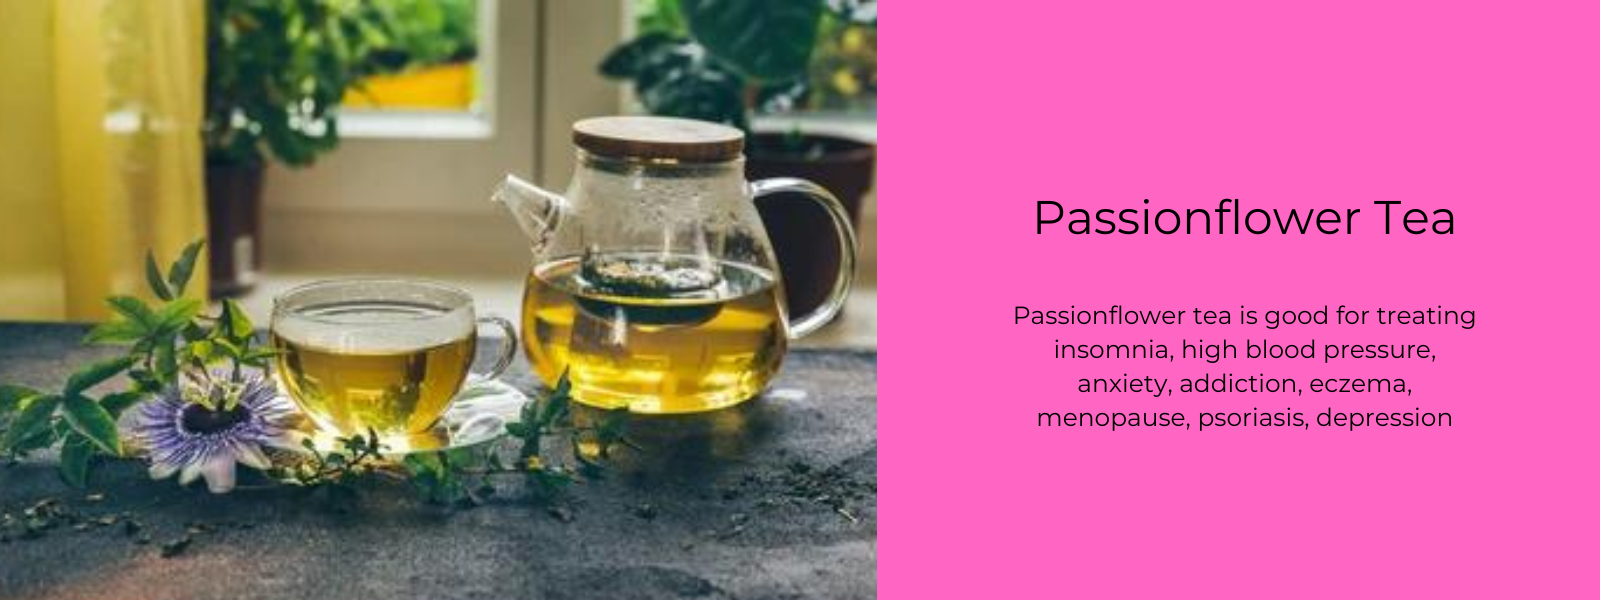 Passionflower Tea - Health Benefits, Uses and Important Facts